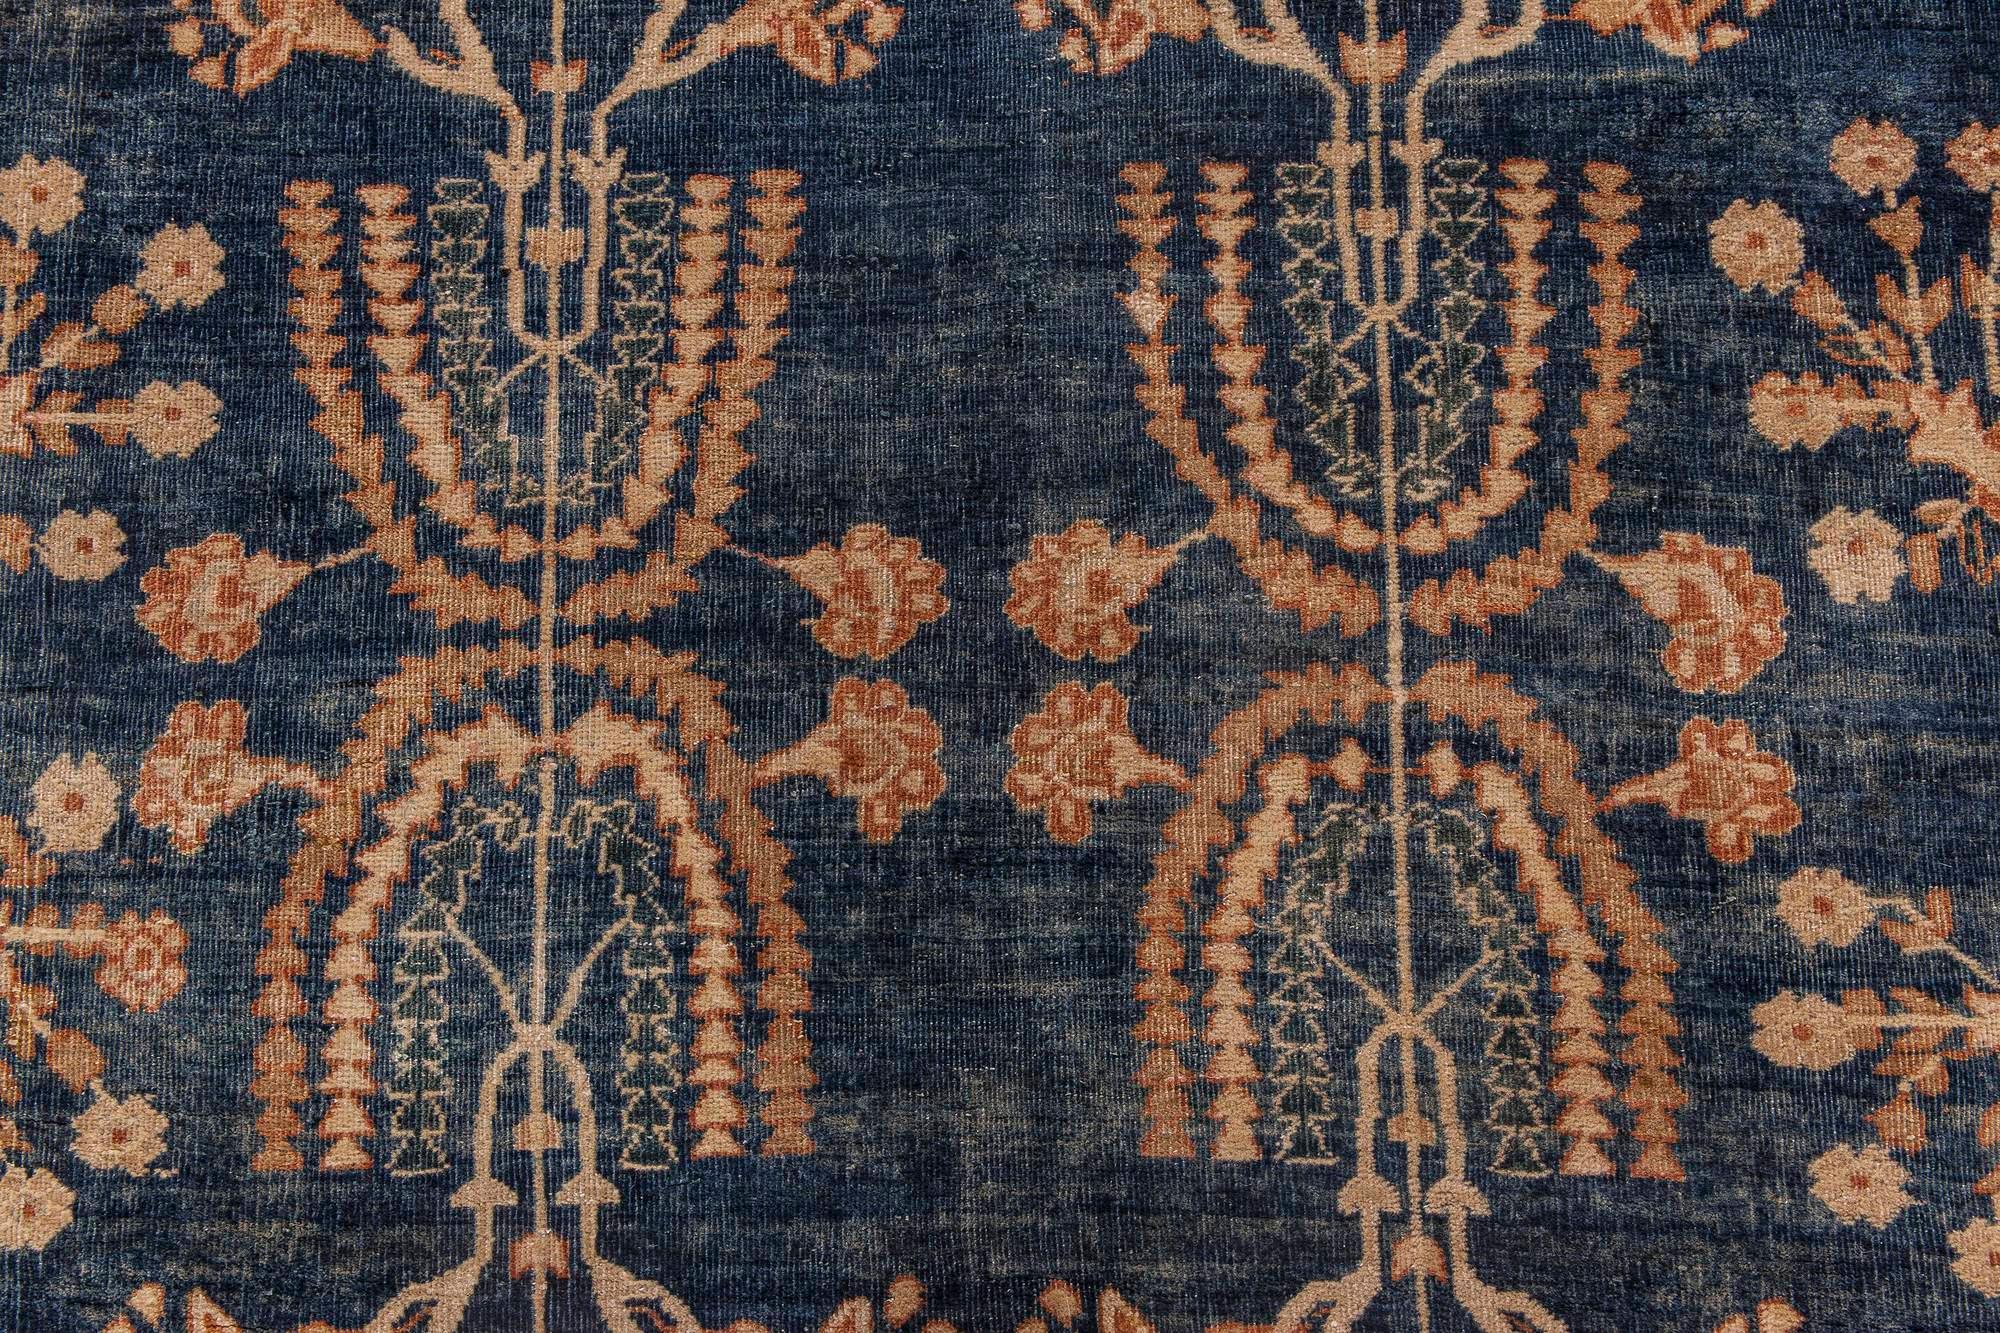 Early 20th century Persian Kirman navy blue and camel wool rug
Size: 13'8